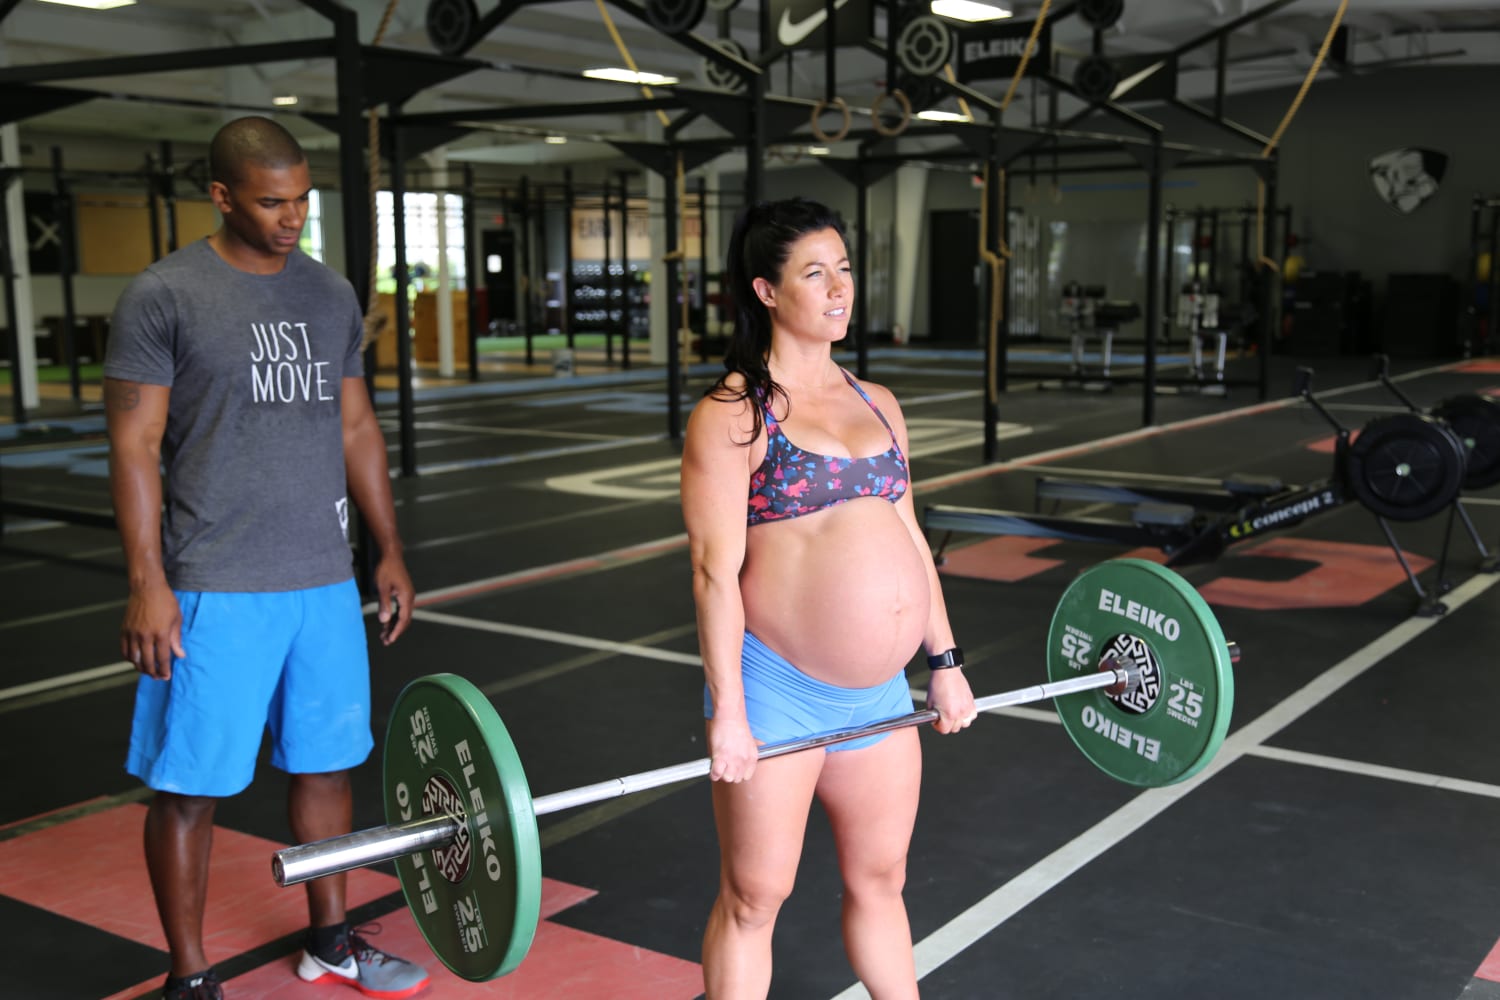 Working out while 9 months pregnant: CrossFit competitor shuts down shamers - TODAY.com